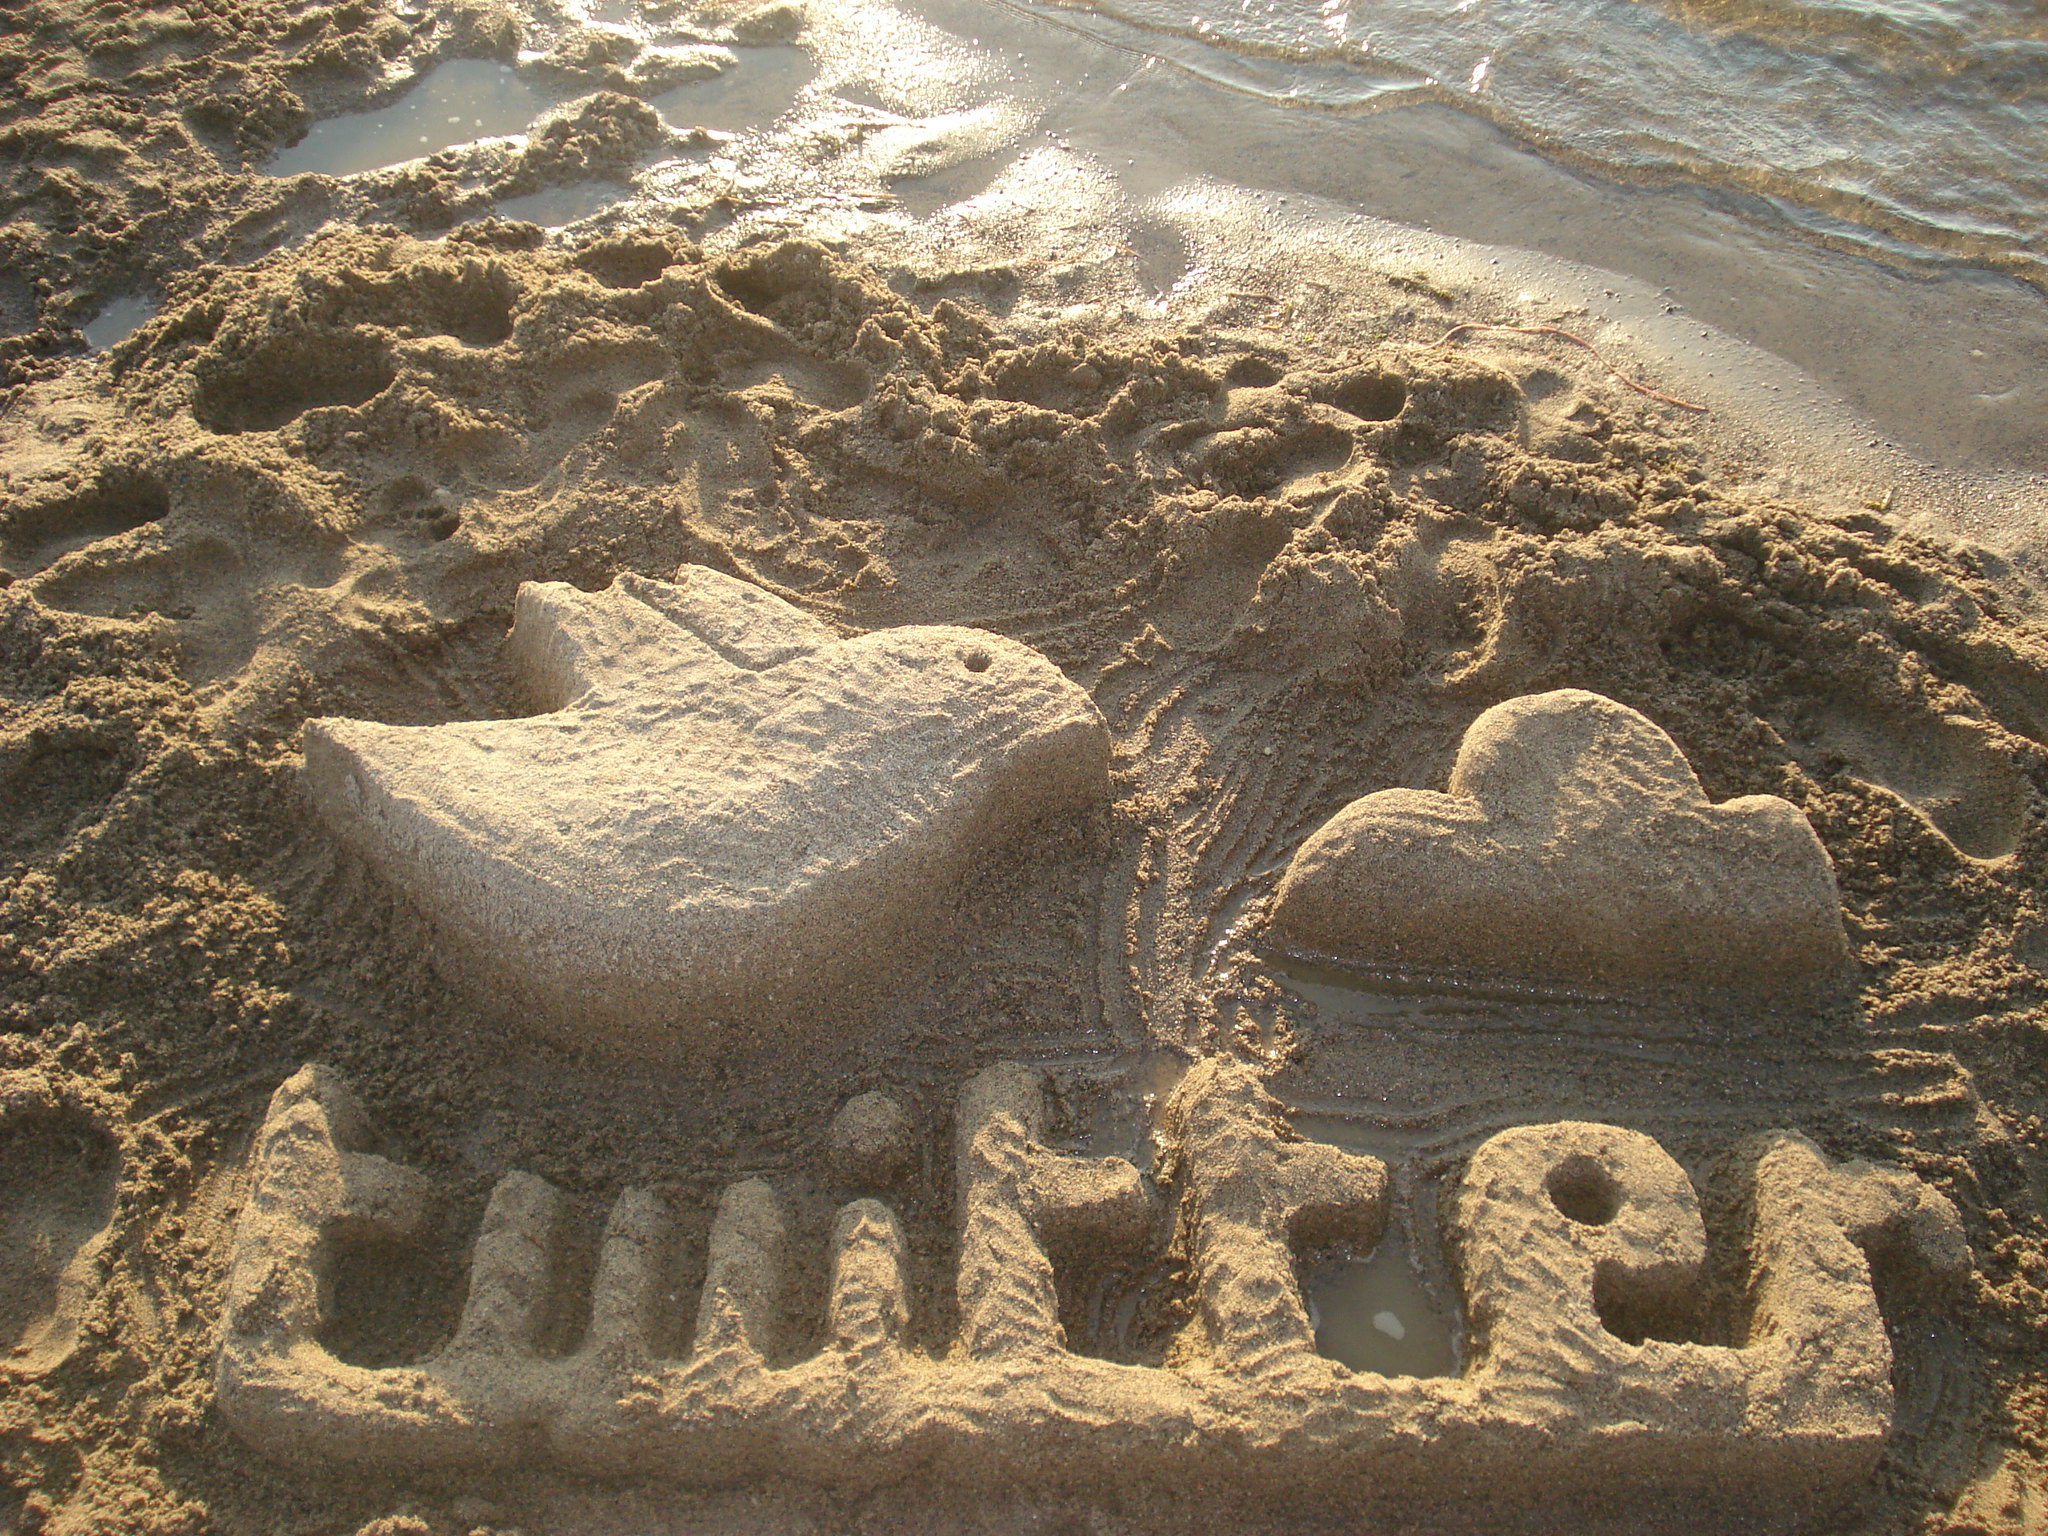 The Twitter logo carved in sand.